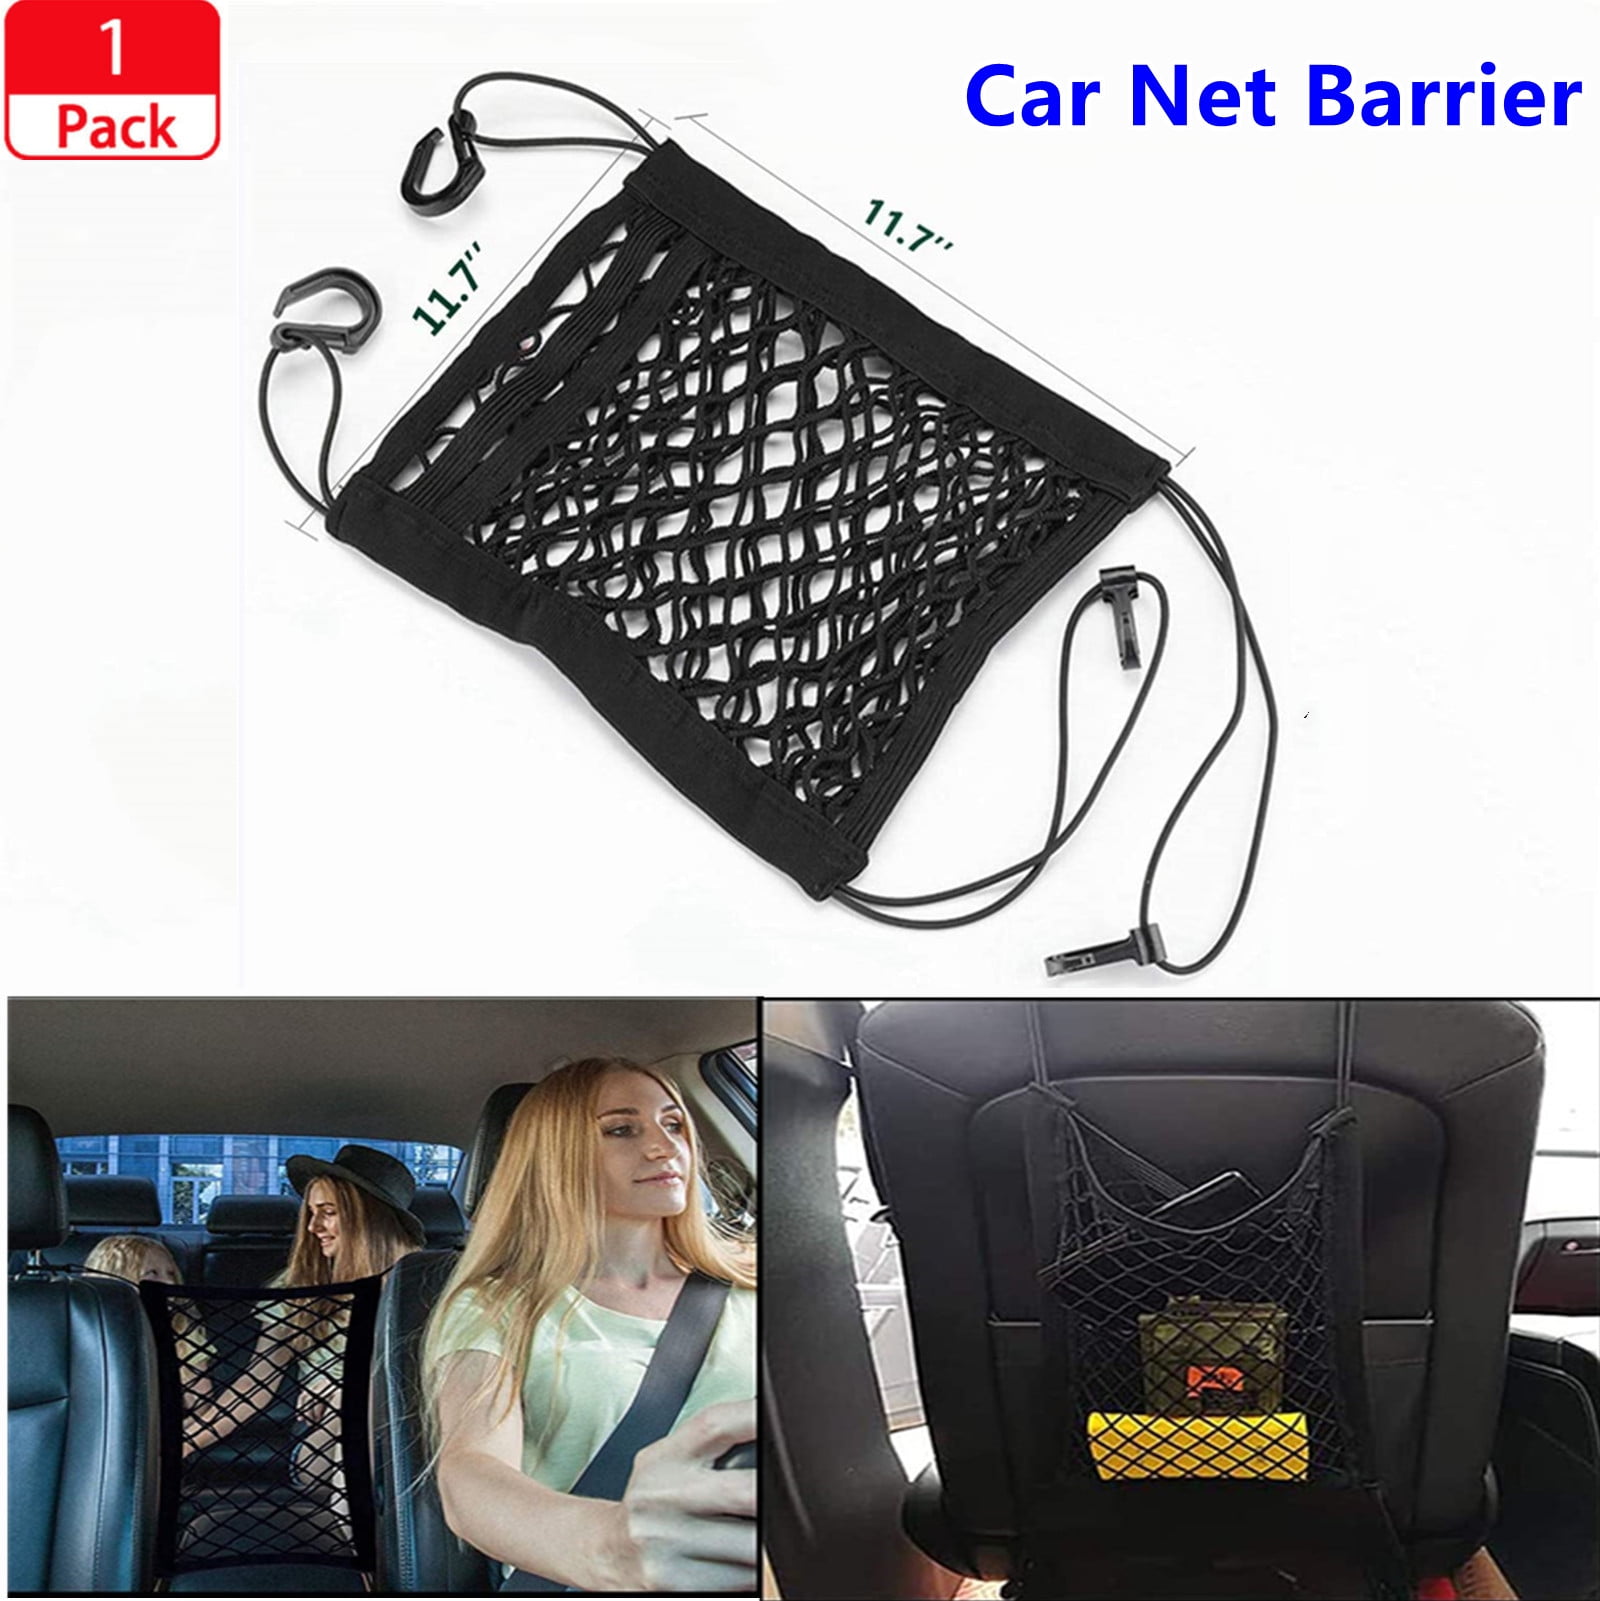 Helps as Dog Barrier,Driver Storage Netting Pouch HZYPPDIAN Car Mesh Organizer,Holder Seat Back Organizer,Car Storage for Purse & Pocket for Smaller Items 